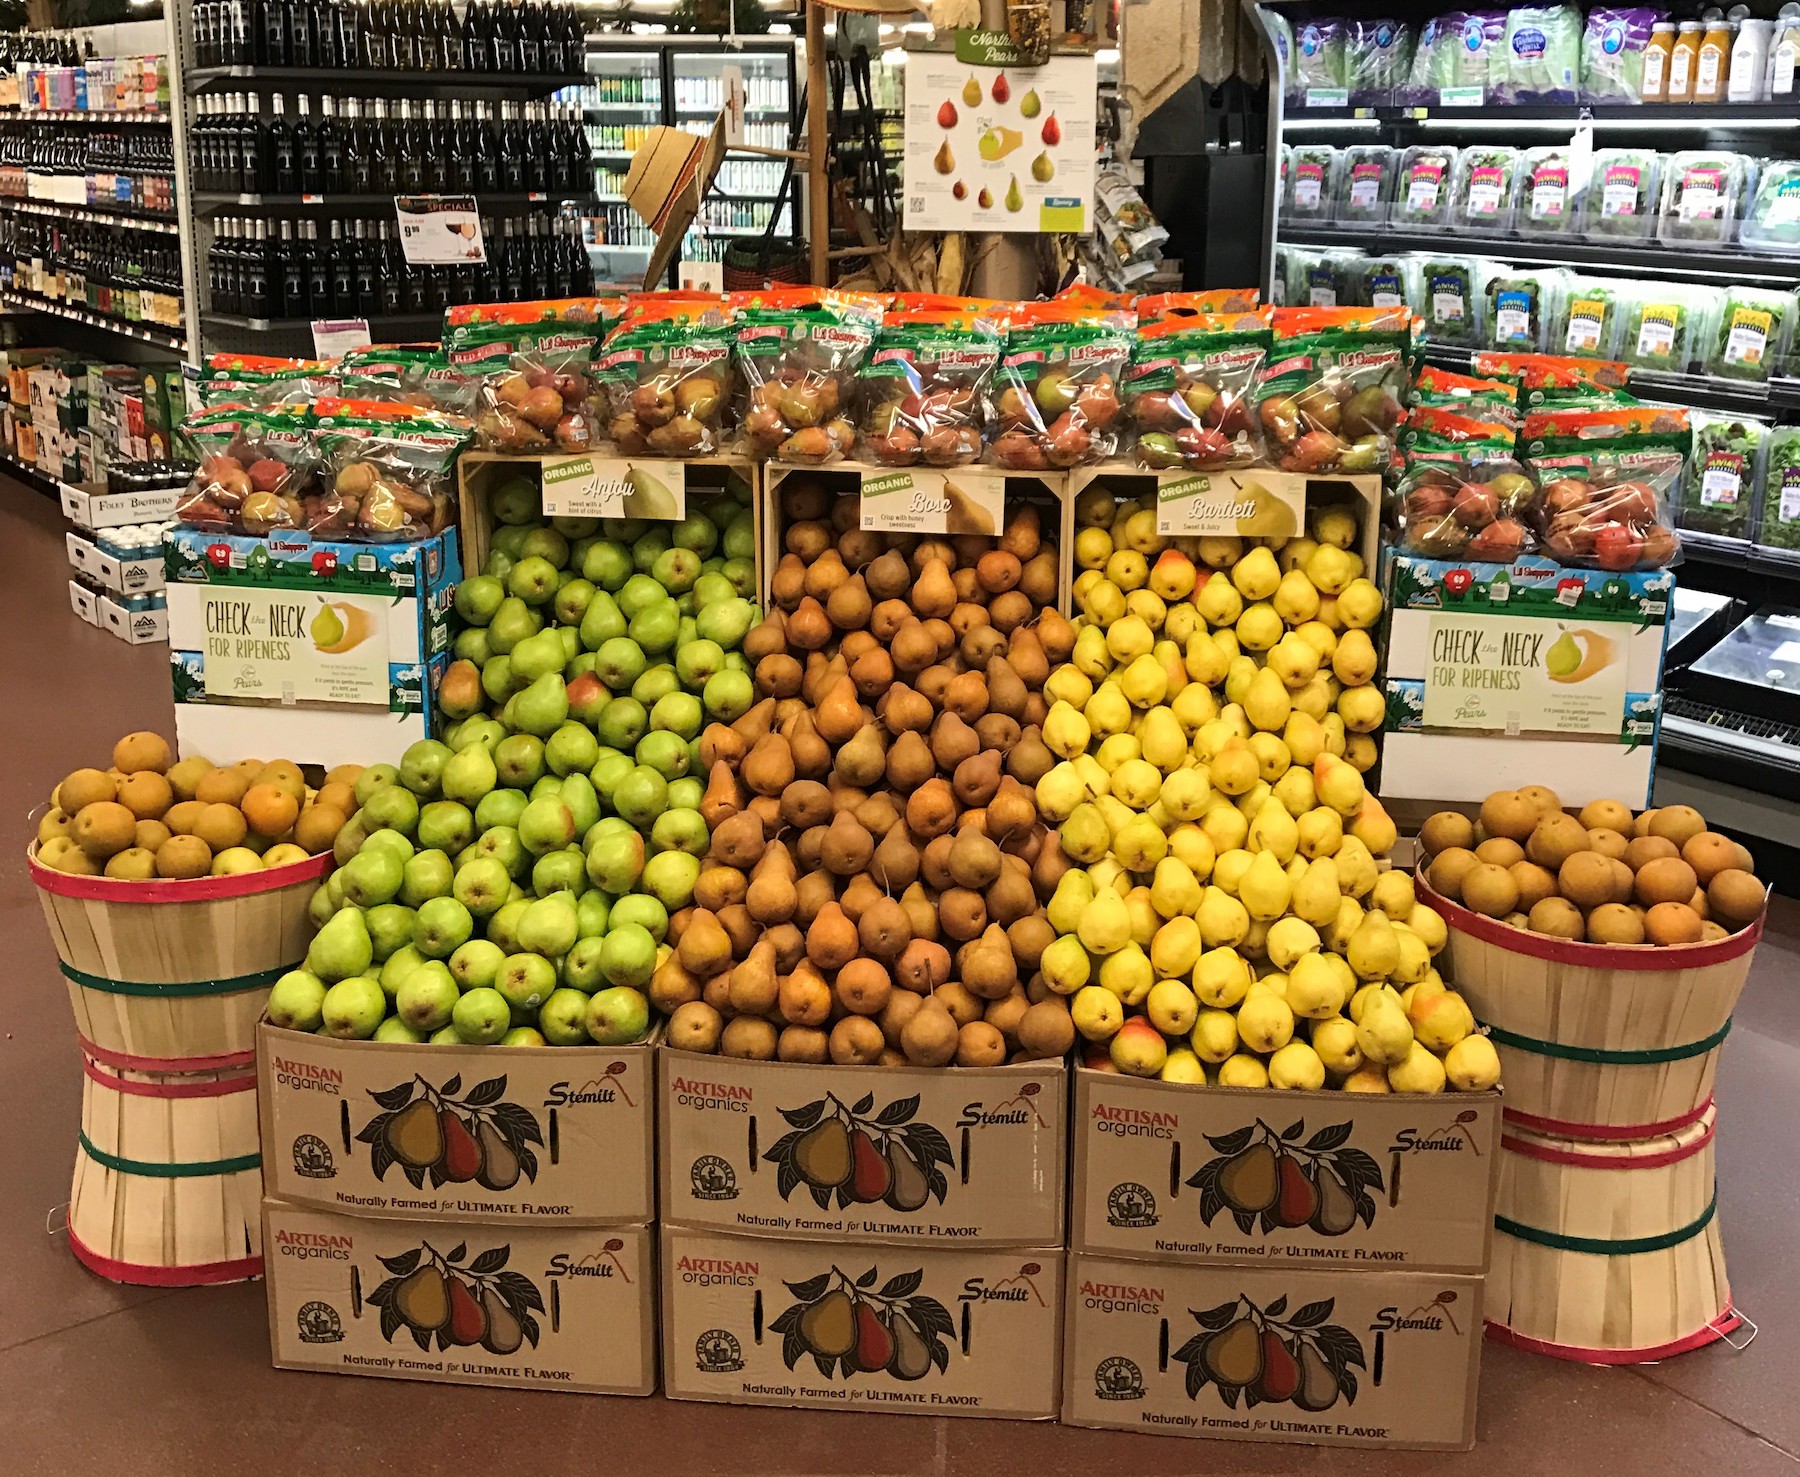 brattleboro pears display in a grocery store